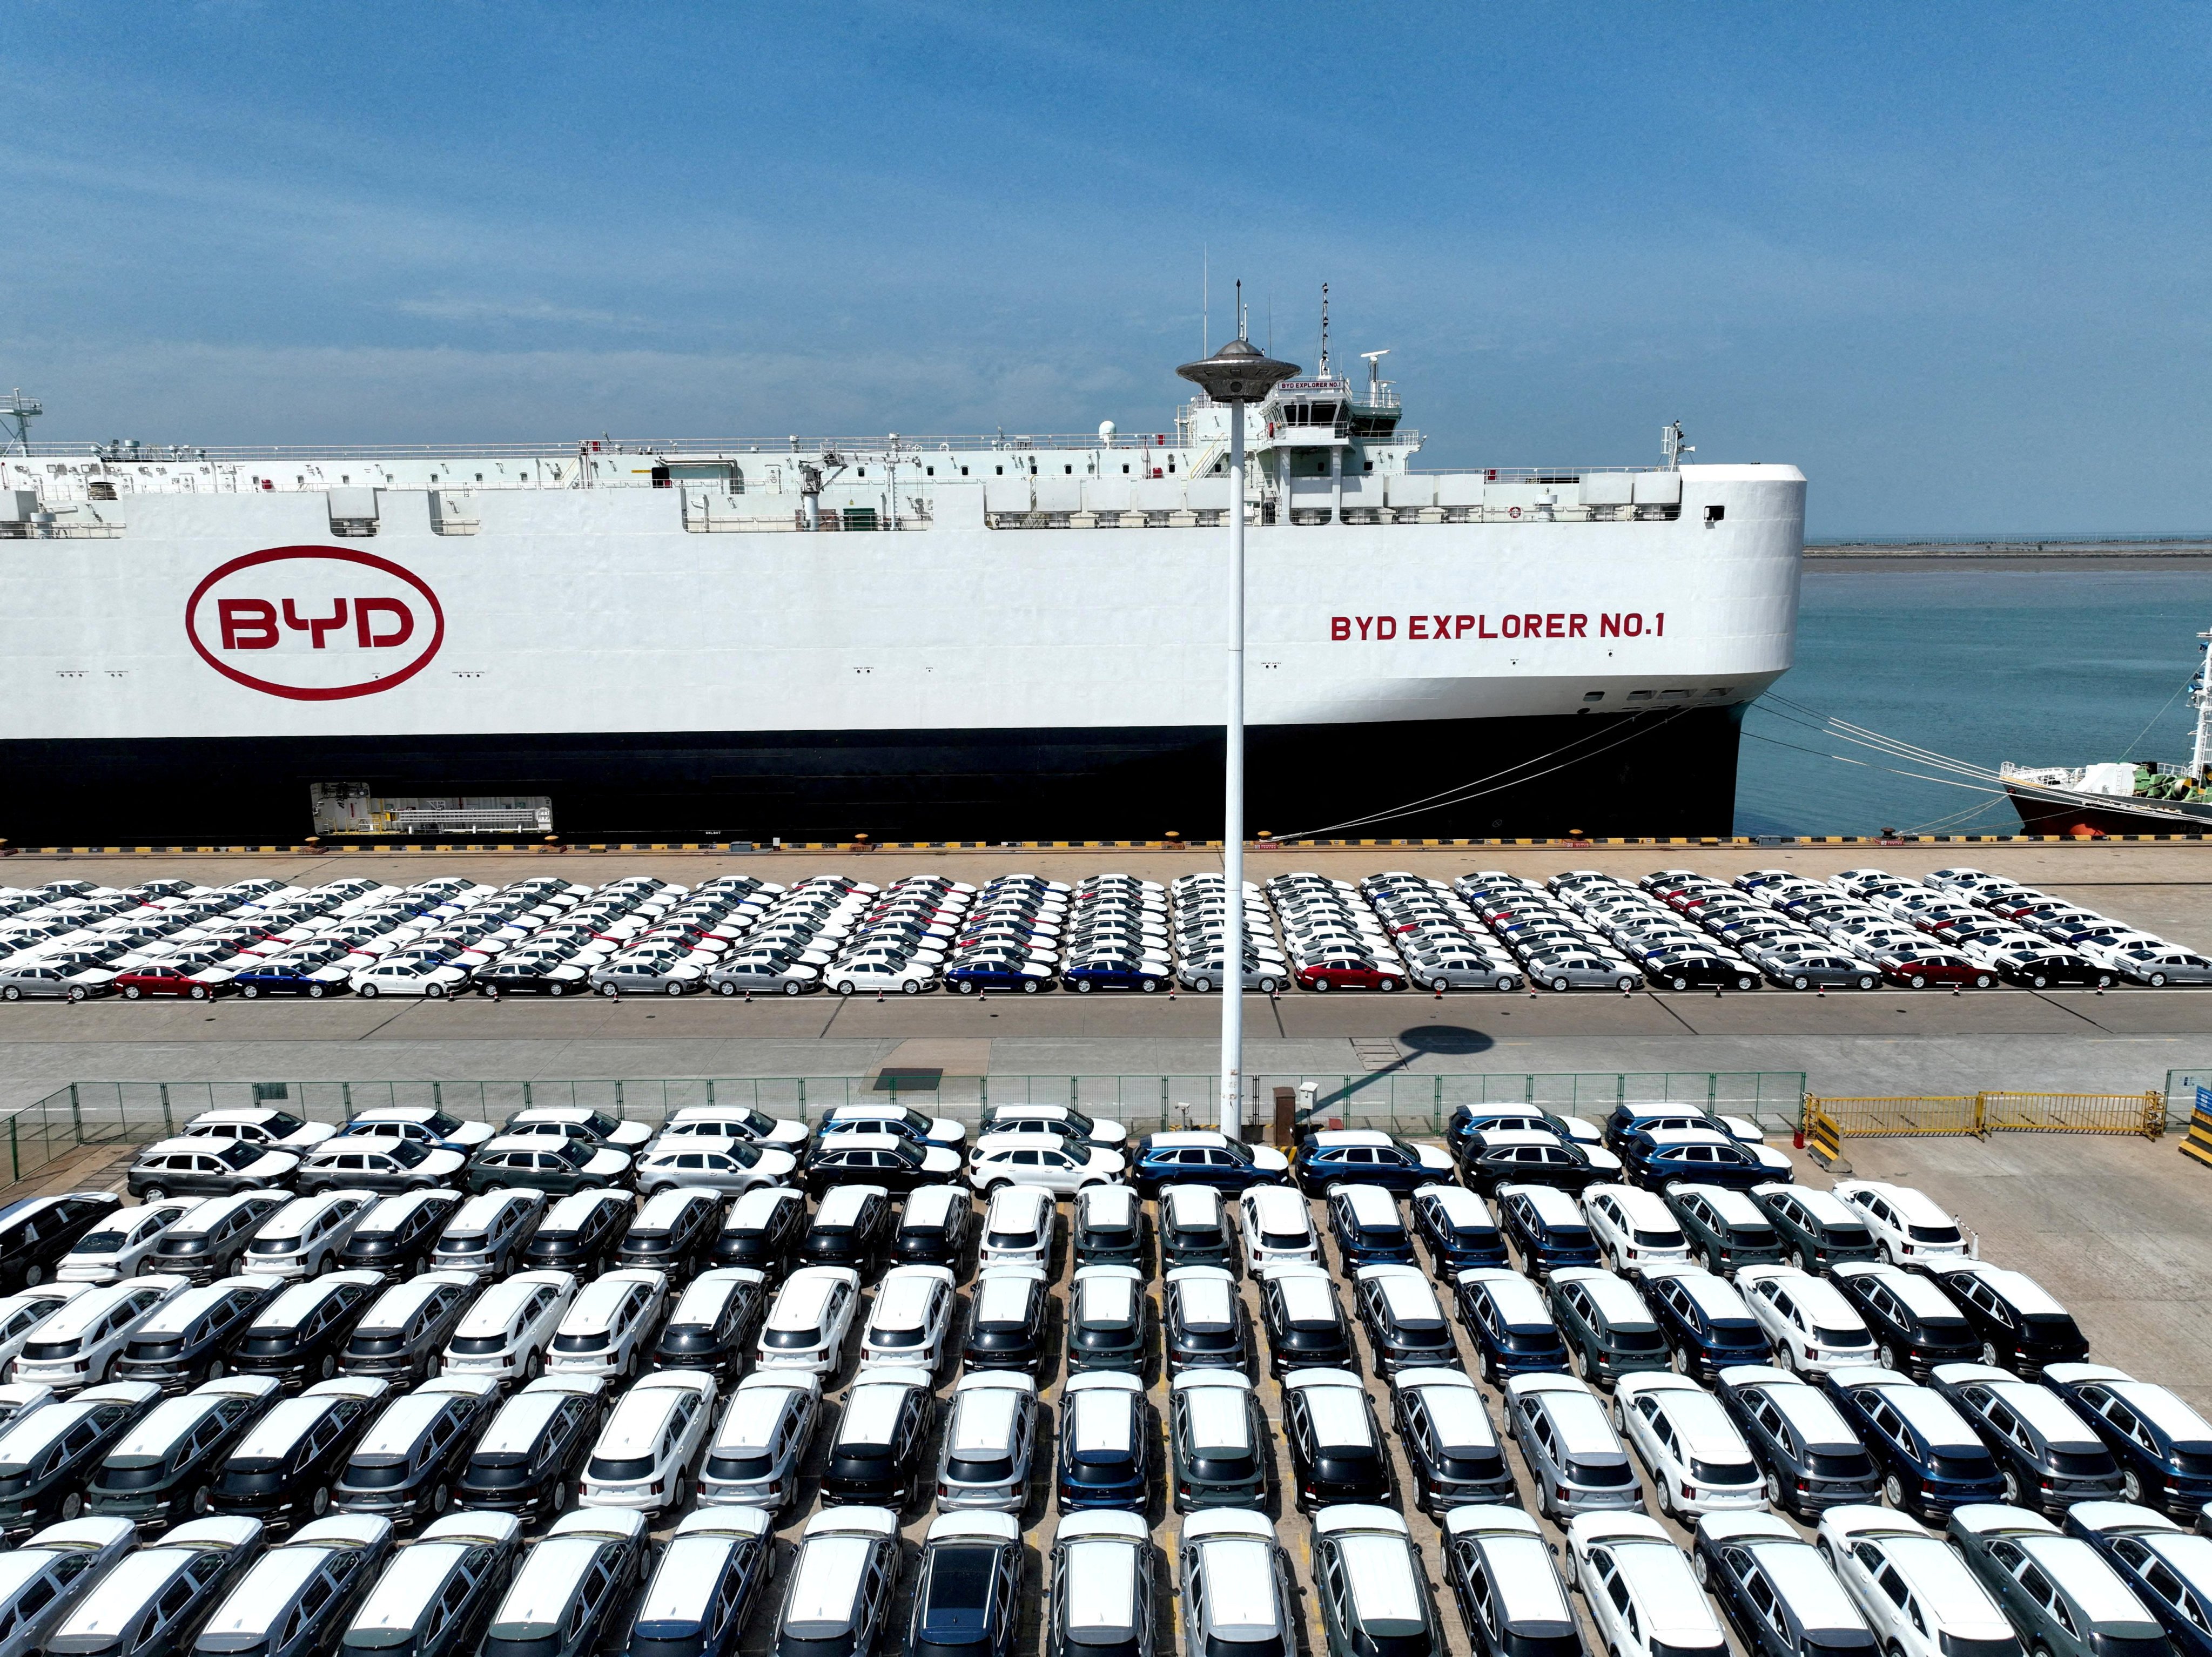 BYD vehicles ready for export are pictured at port Lianyungang port in China’s Jiangsu province. Photo: China Daily via Reuters